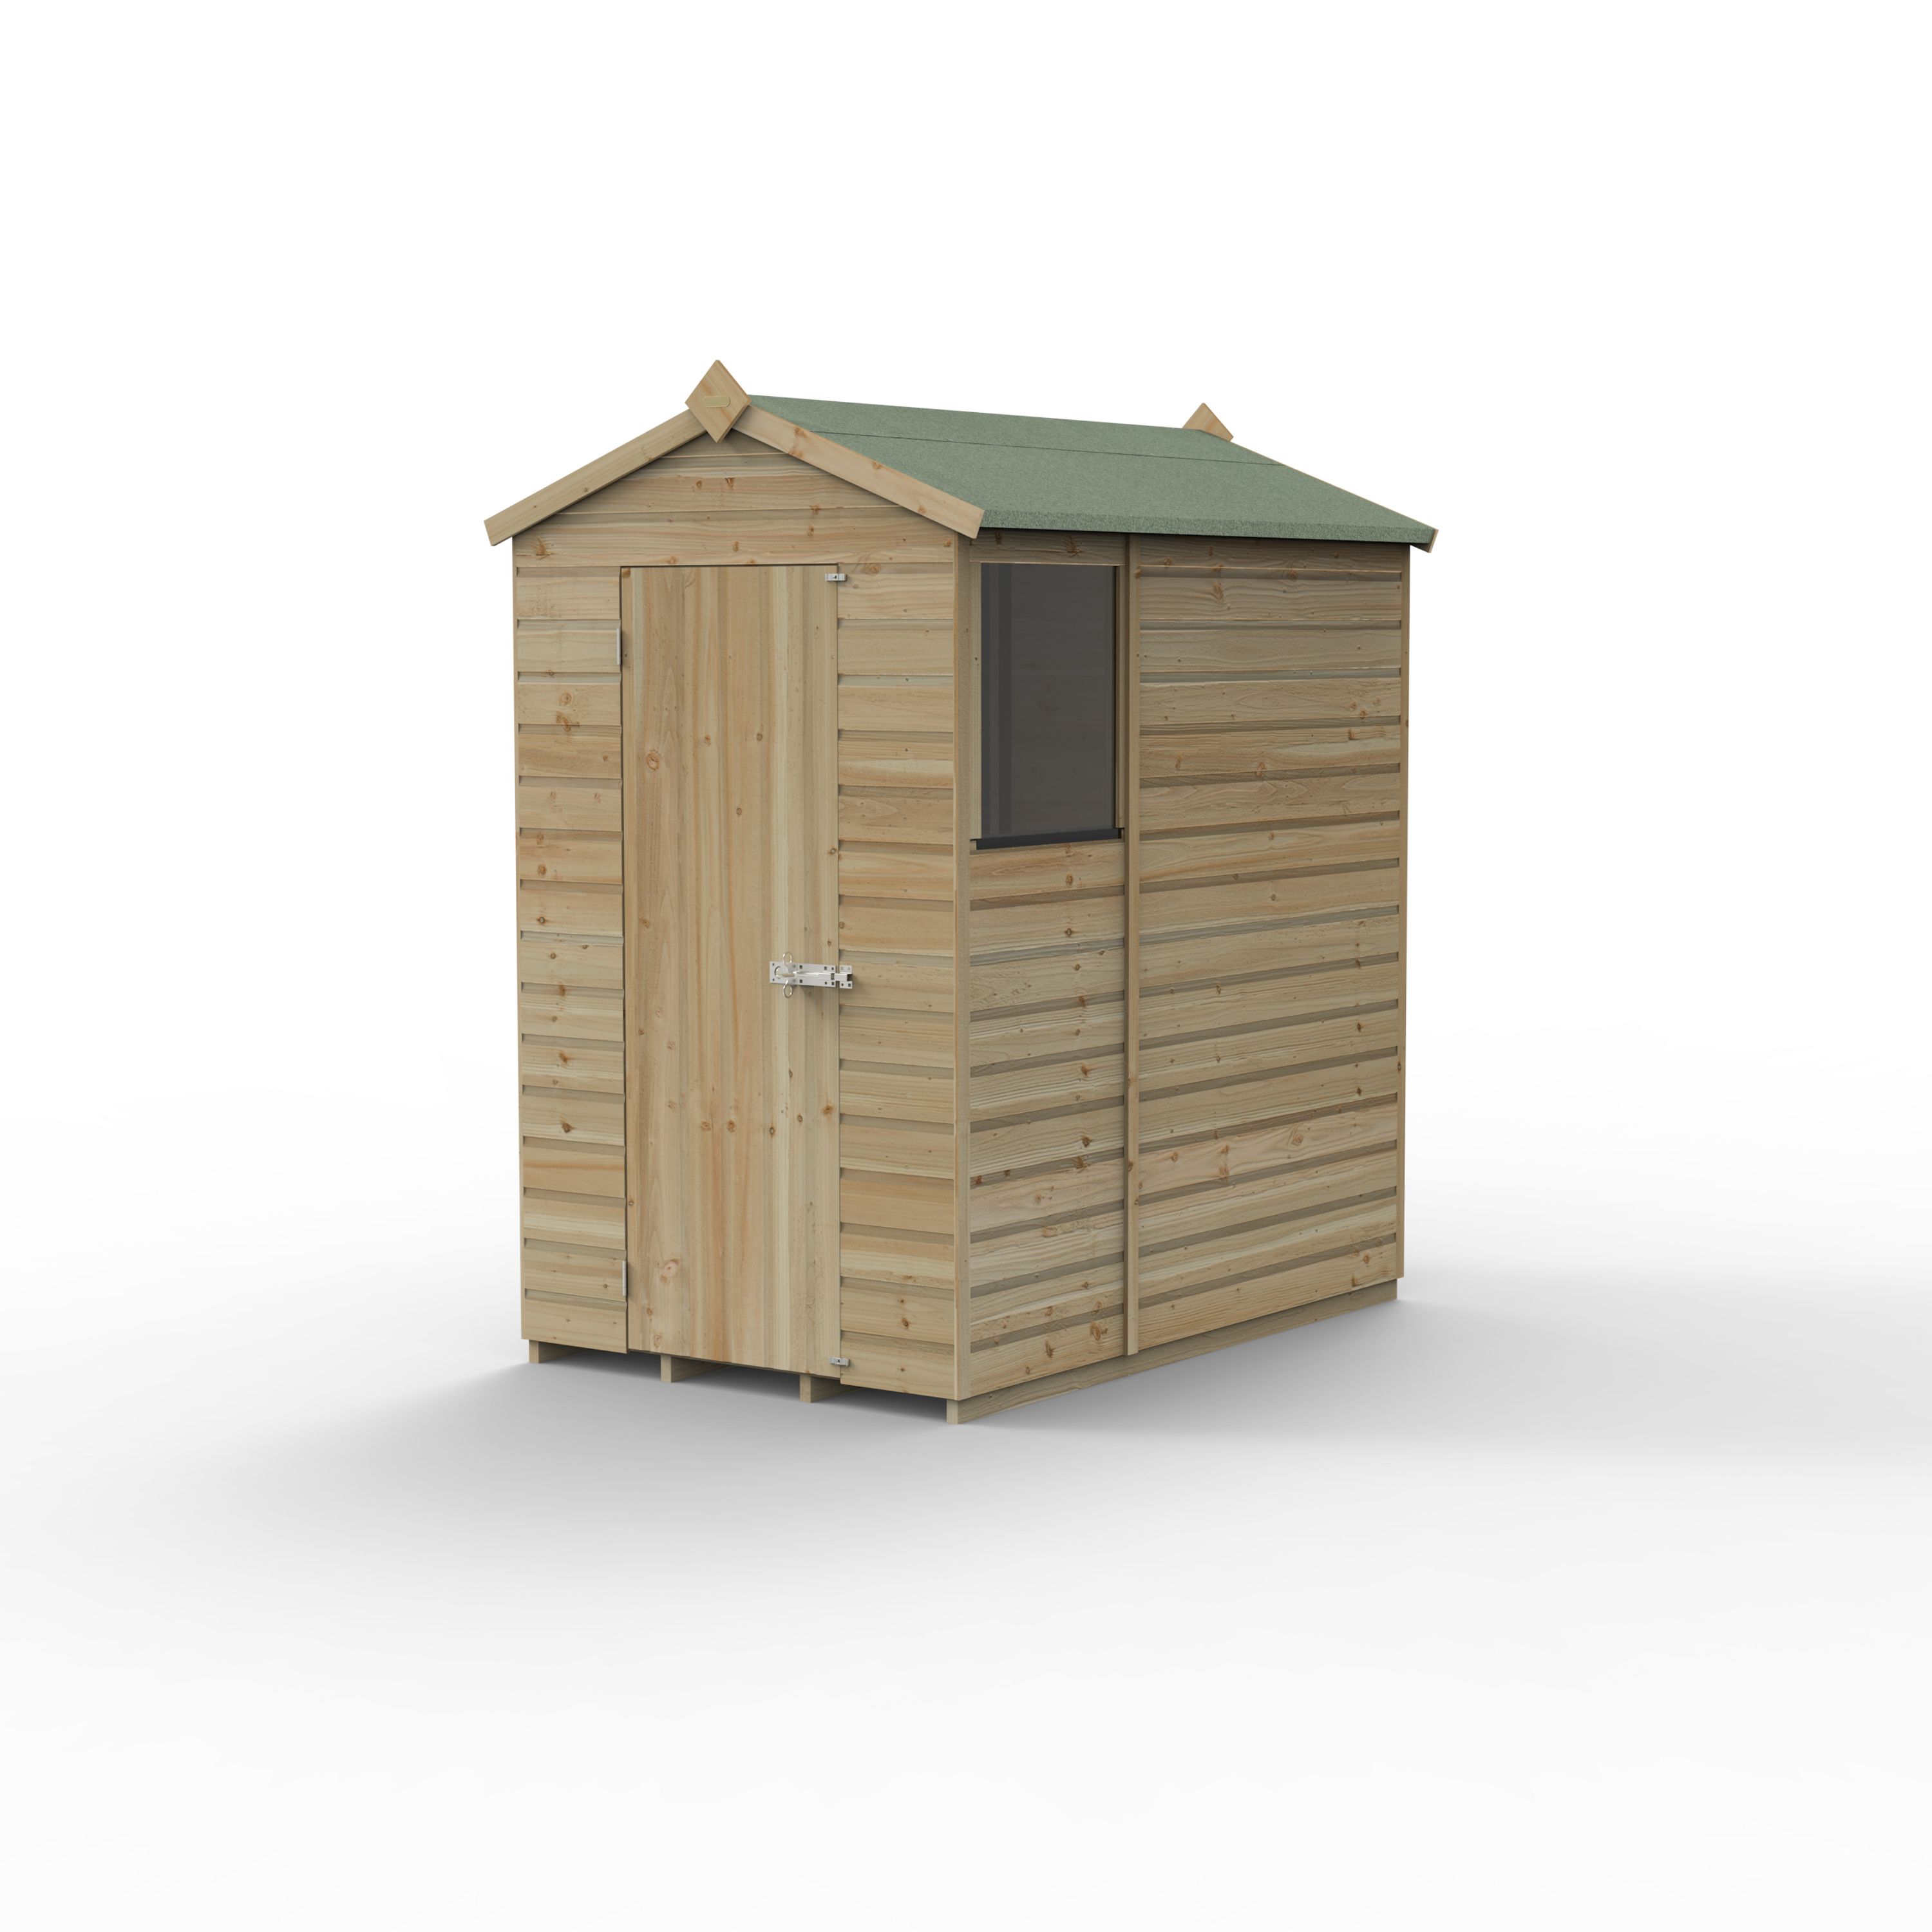 Forest Garden Beckwood 6x4 ft Apex Natural timber Wooden Shed with floor & 1 window (Base included) - Assembly not required